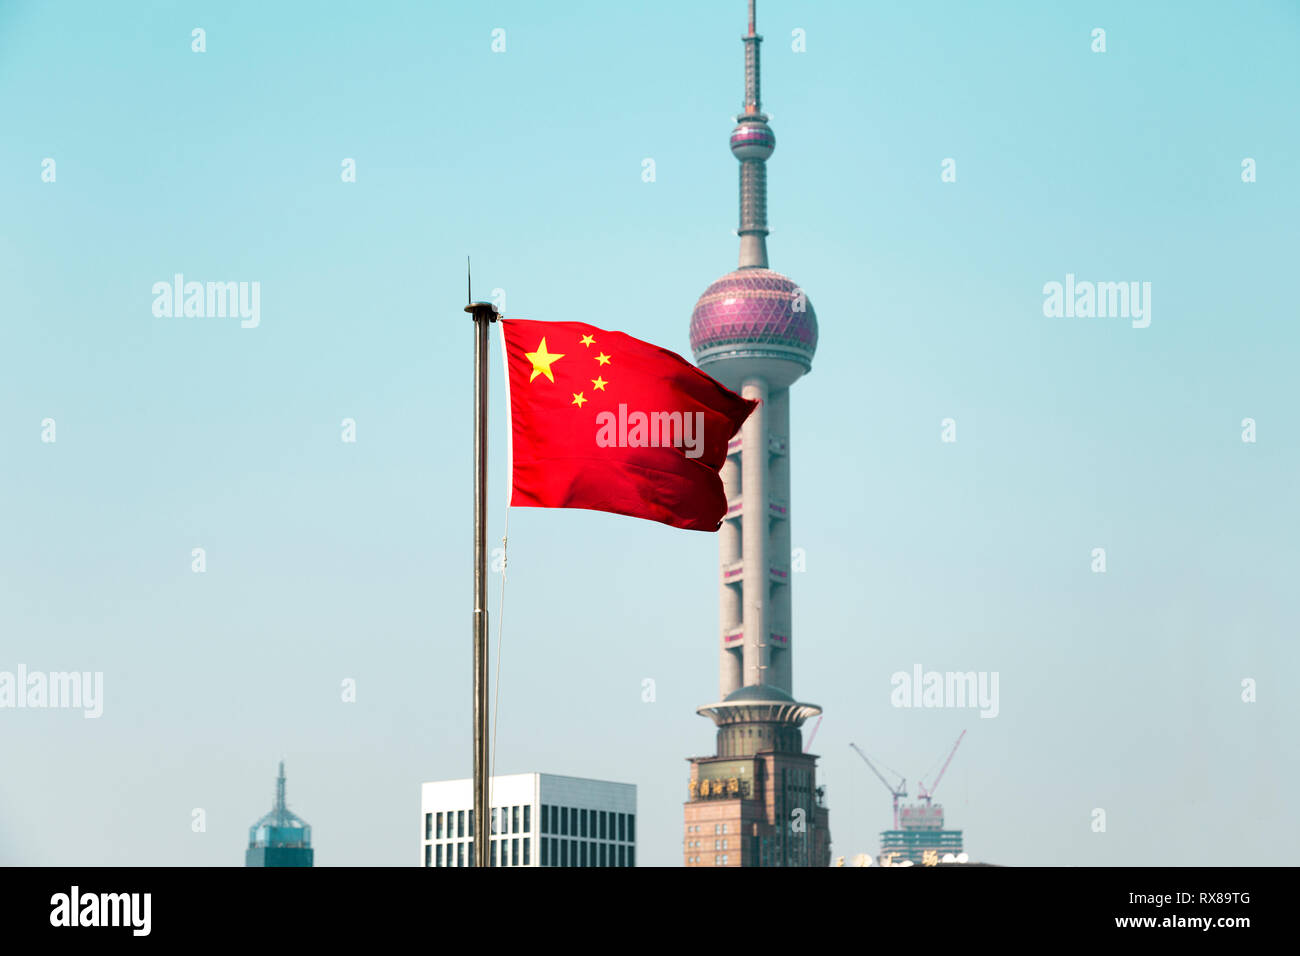 The Chinese flag blows in the wind. Behind it the Oriental Pearl Tower a landmark structure of Shanghai. Pudong, Shanhai, China. Stock Photo